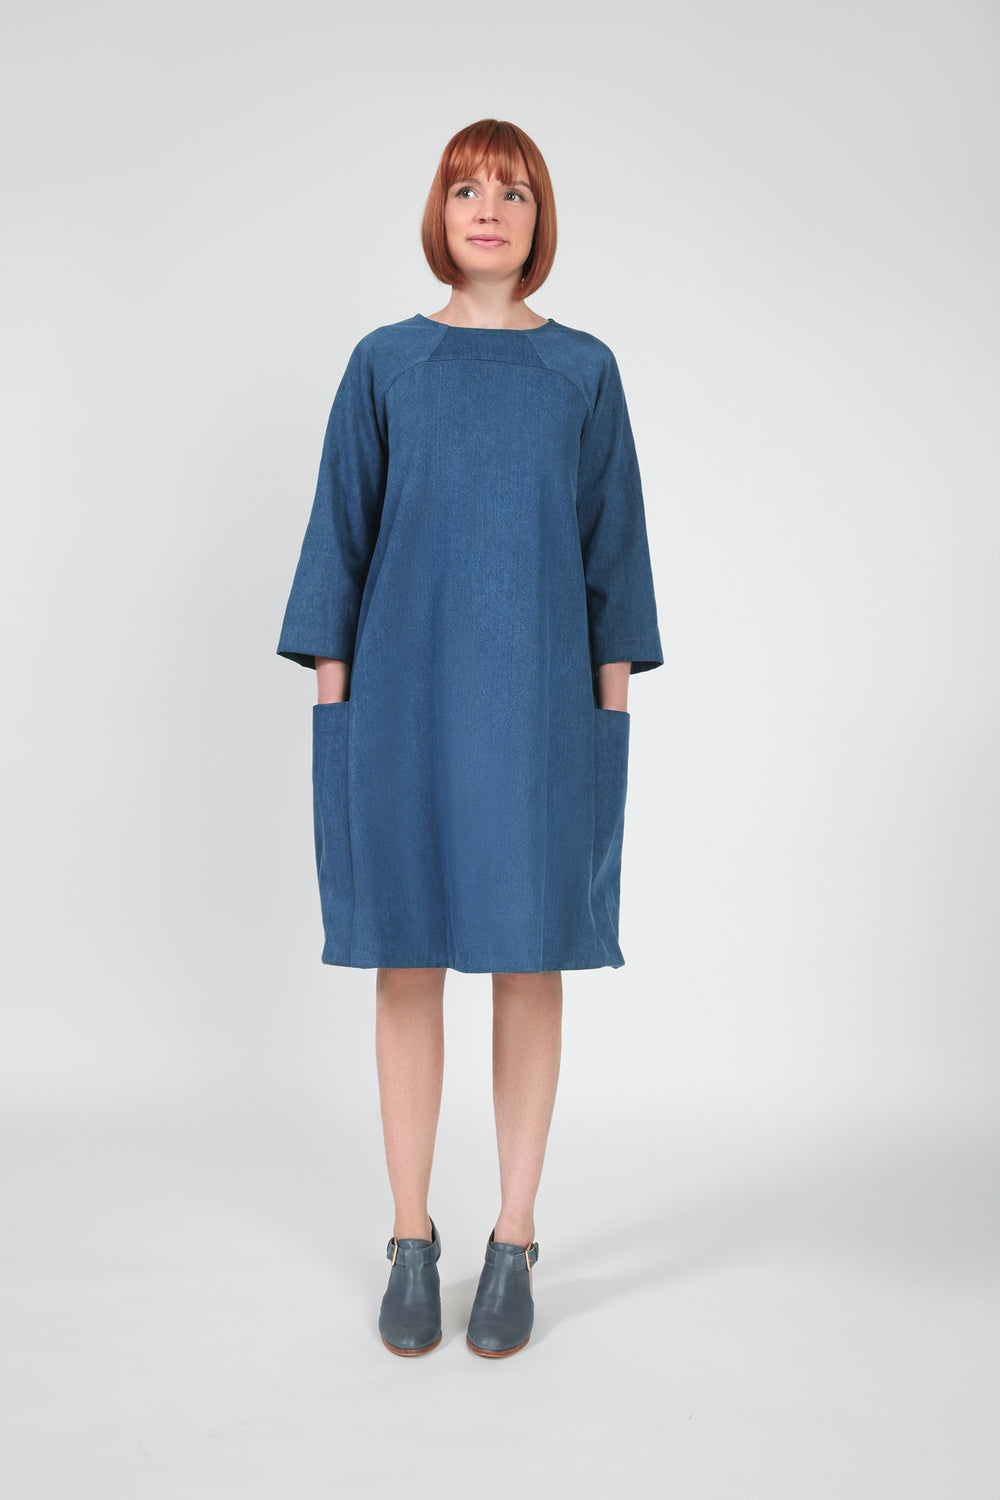 Woman wearing the Rushcutter Dress pattern from In the Folds on The Fold Line. A knee length dress pattern made in cotton shirting, poplin, sateen, linen, silk, wool, chambray, denim, viscose blend or silk crepe de chine fabrics, featuring an A-line shape